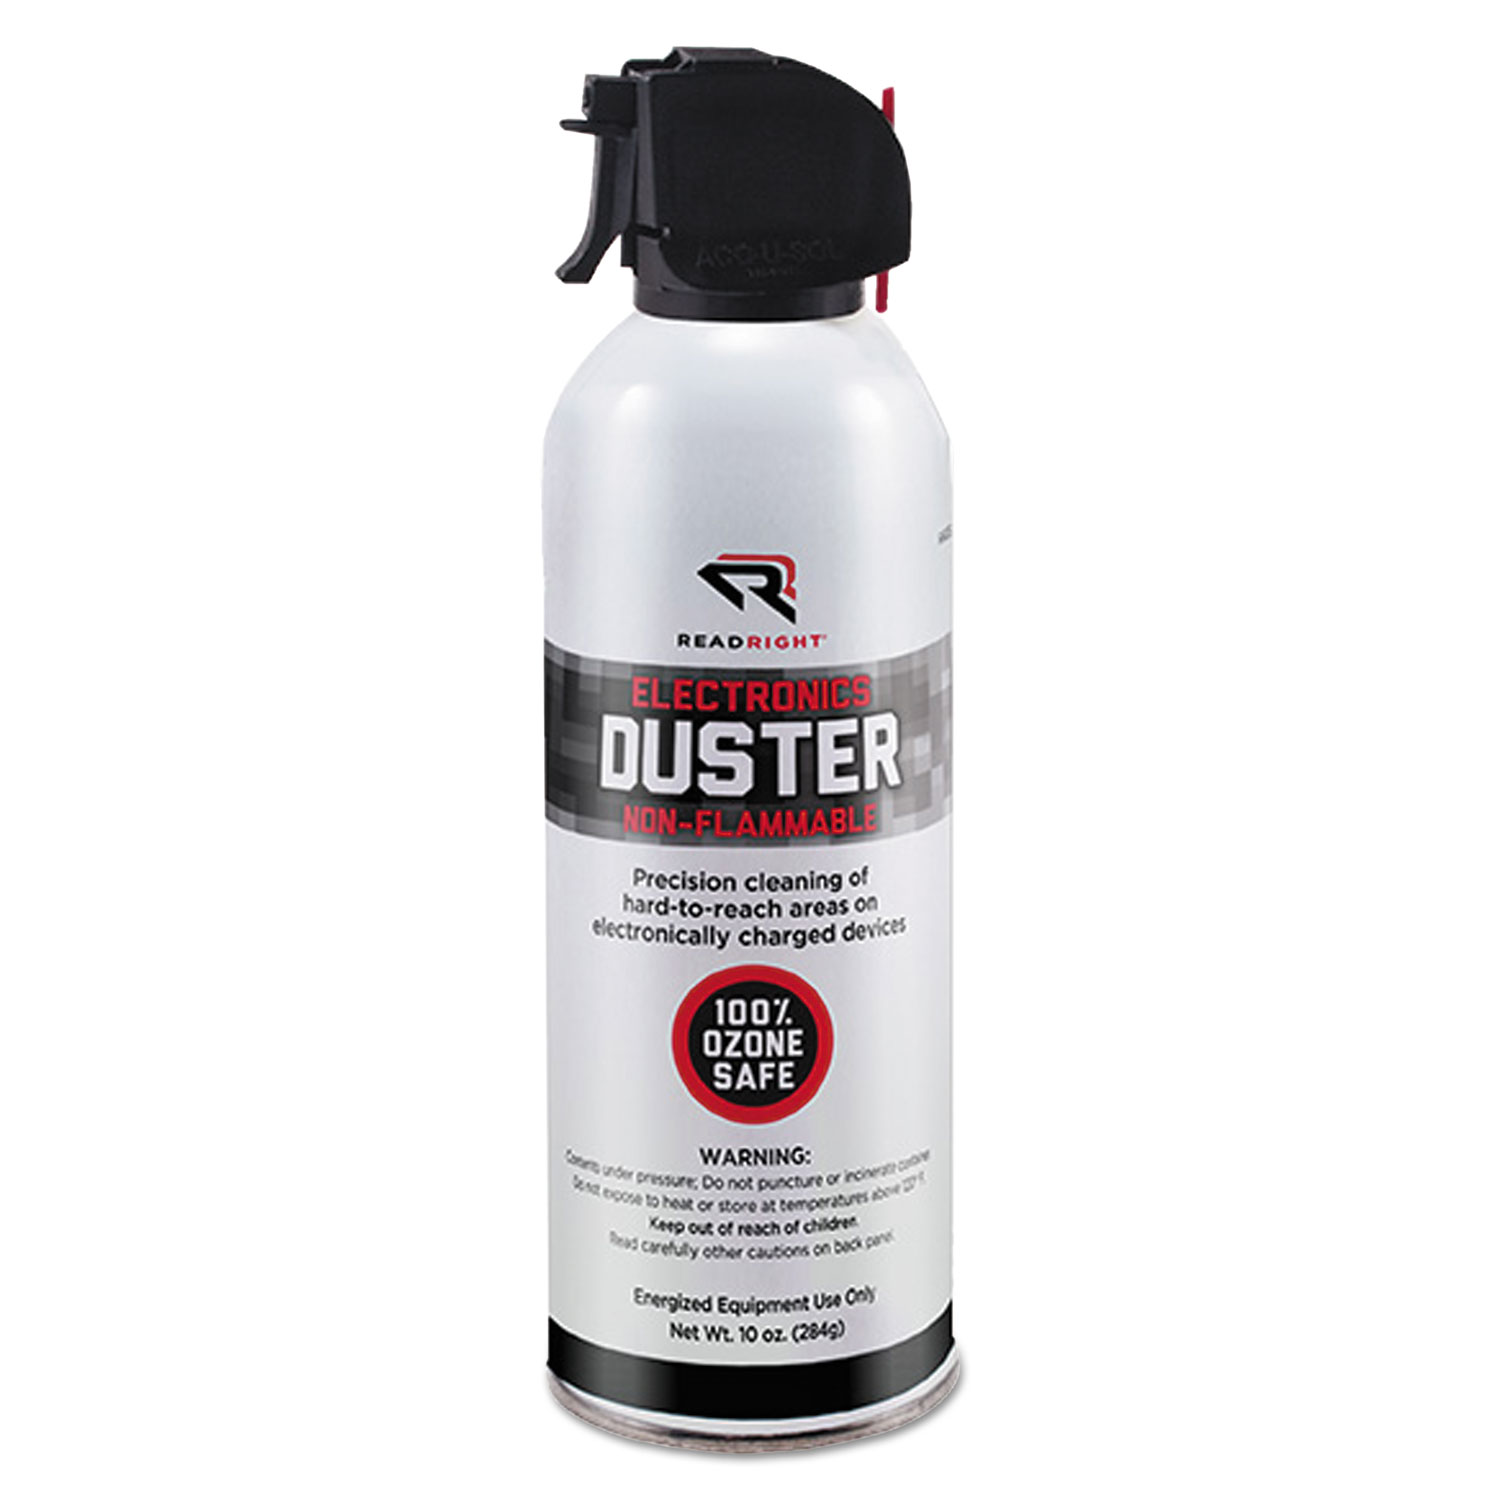 OfficeDuster Air Duster, 10 oz Can